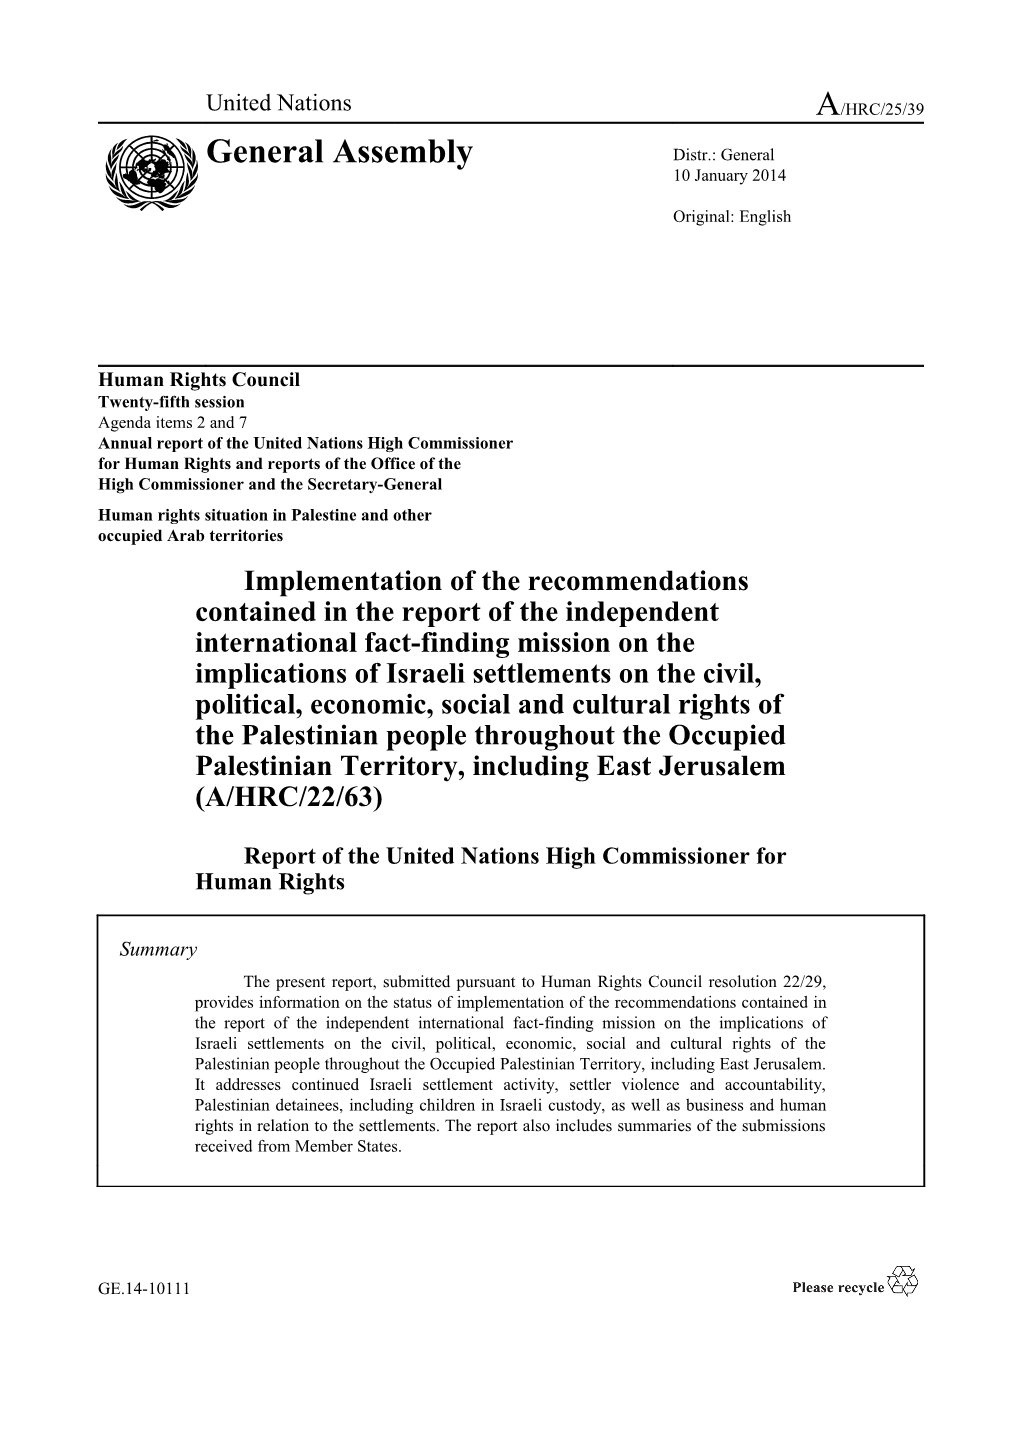 Implementation of the Recommendations Contained in the Report of the Independent International